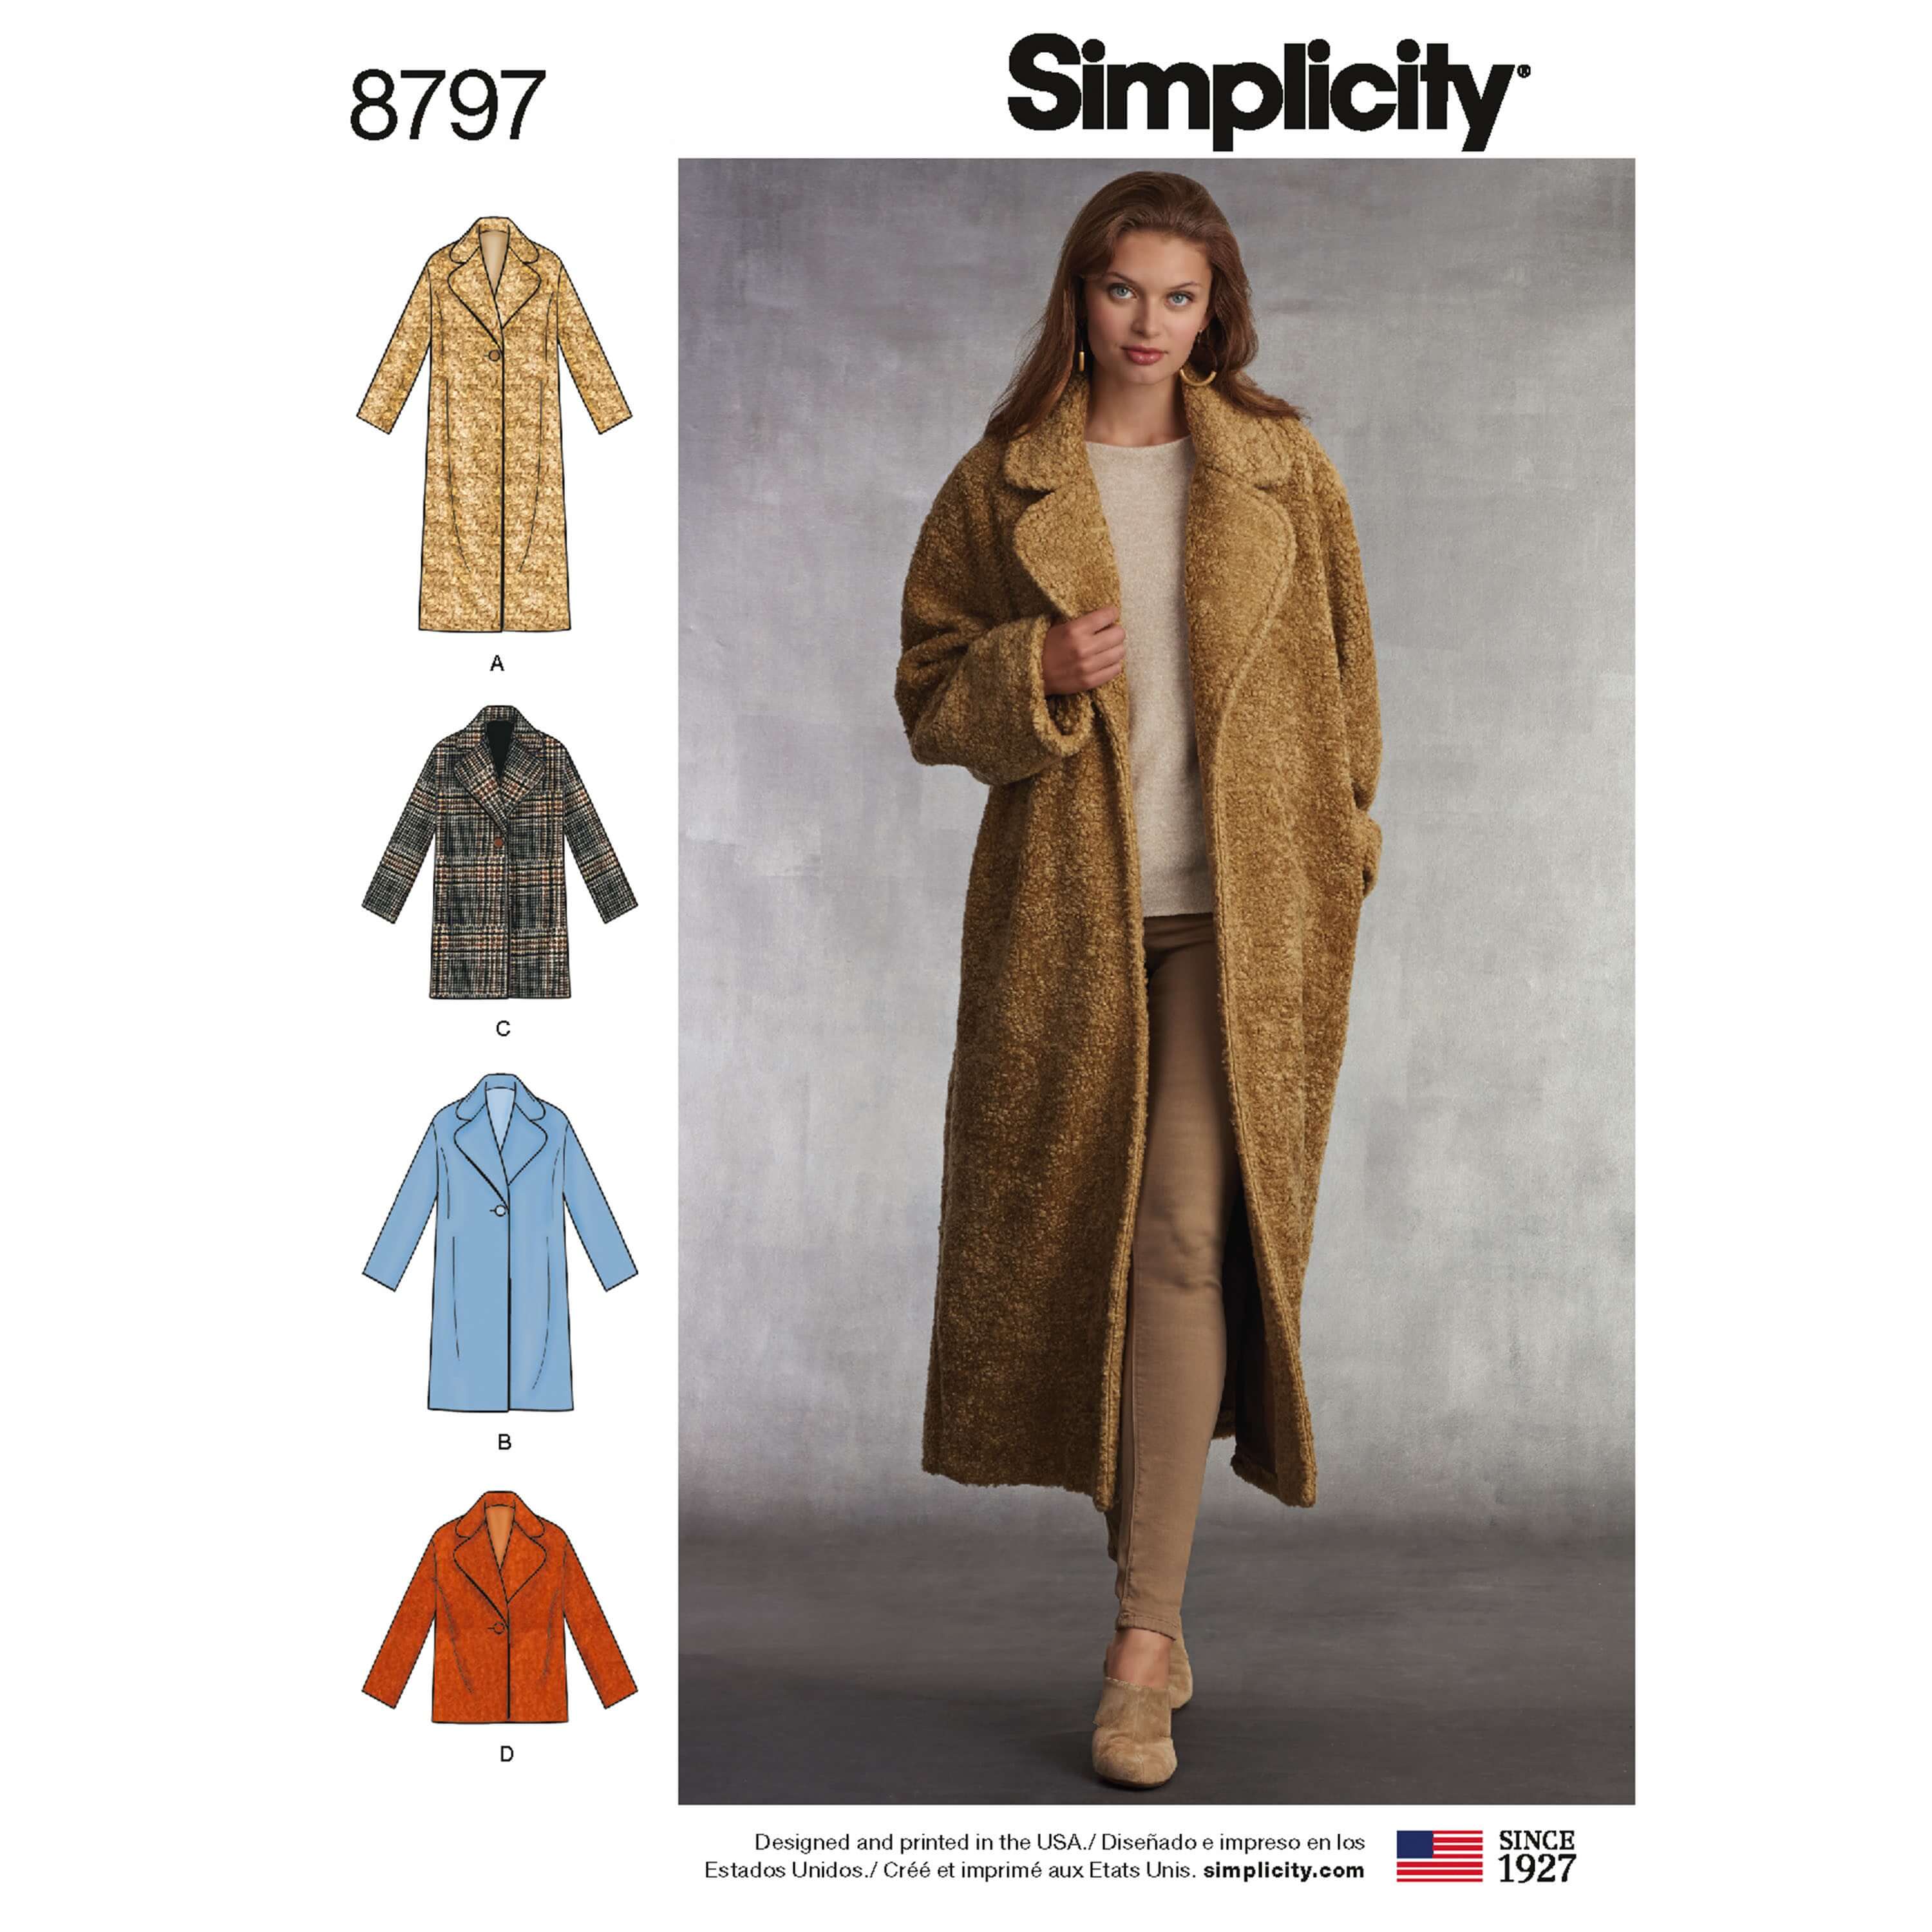 Simplicity 8797 Misses' Loose Fitting Coat With Lining Sewing Patterns